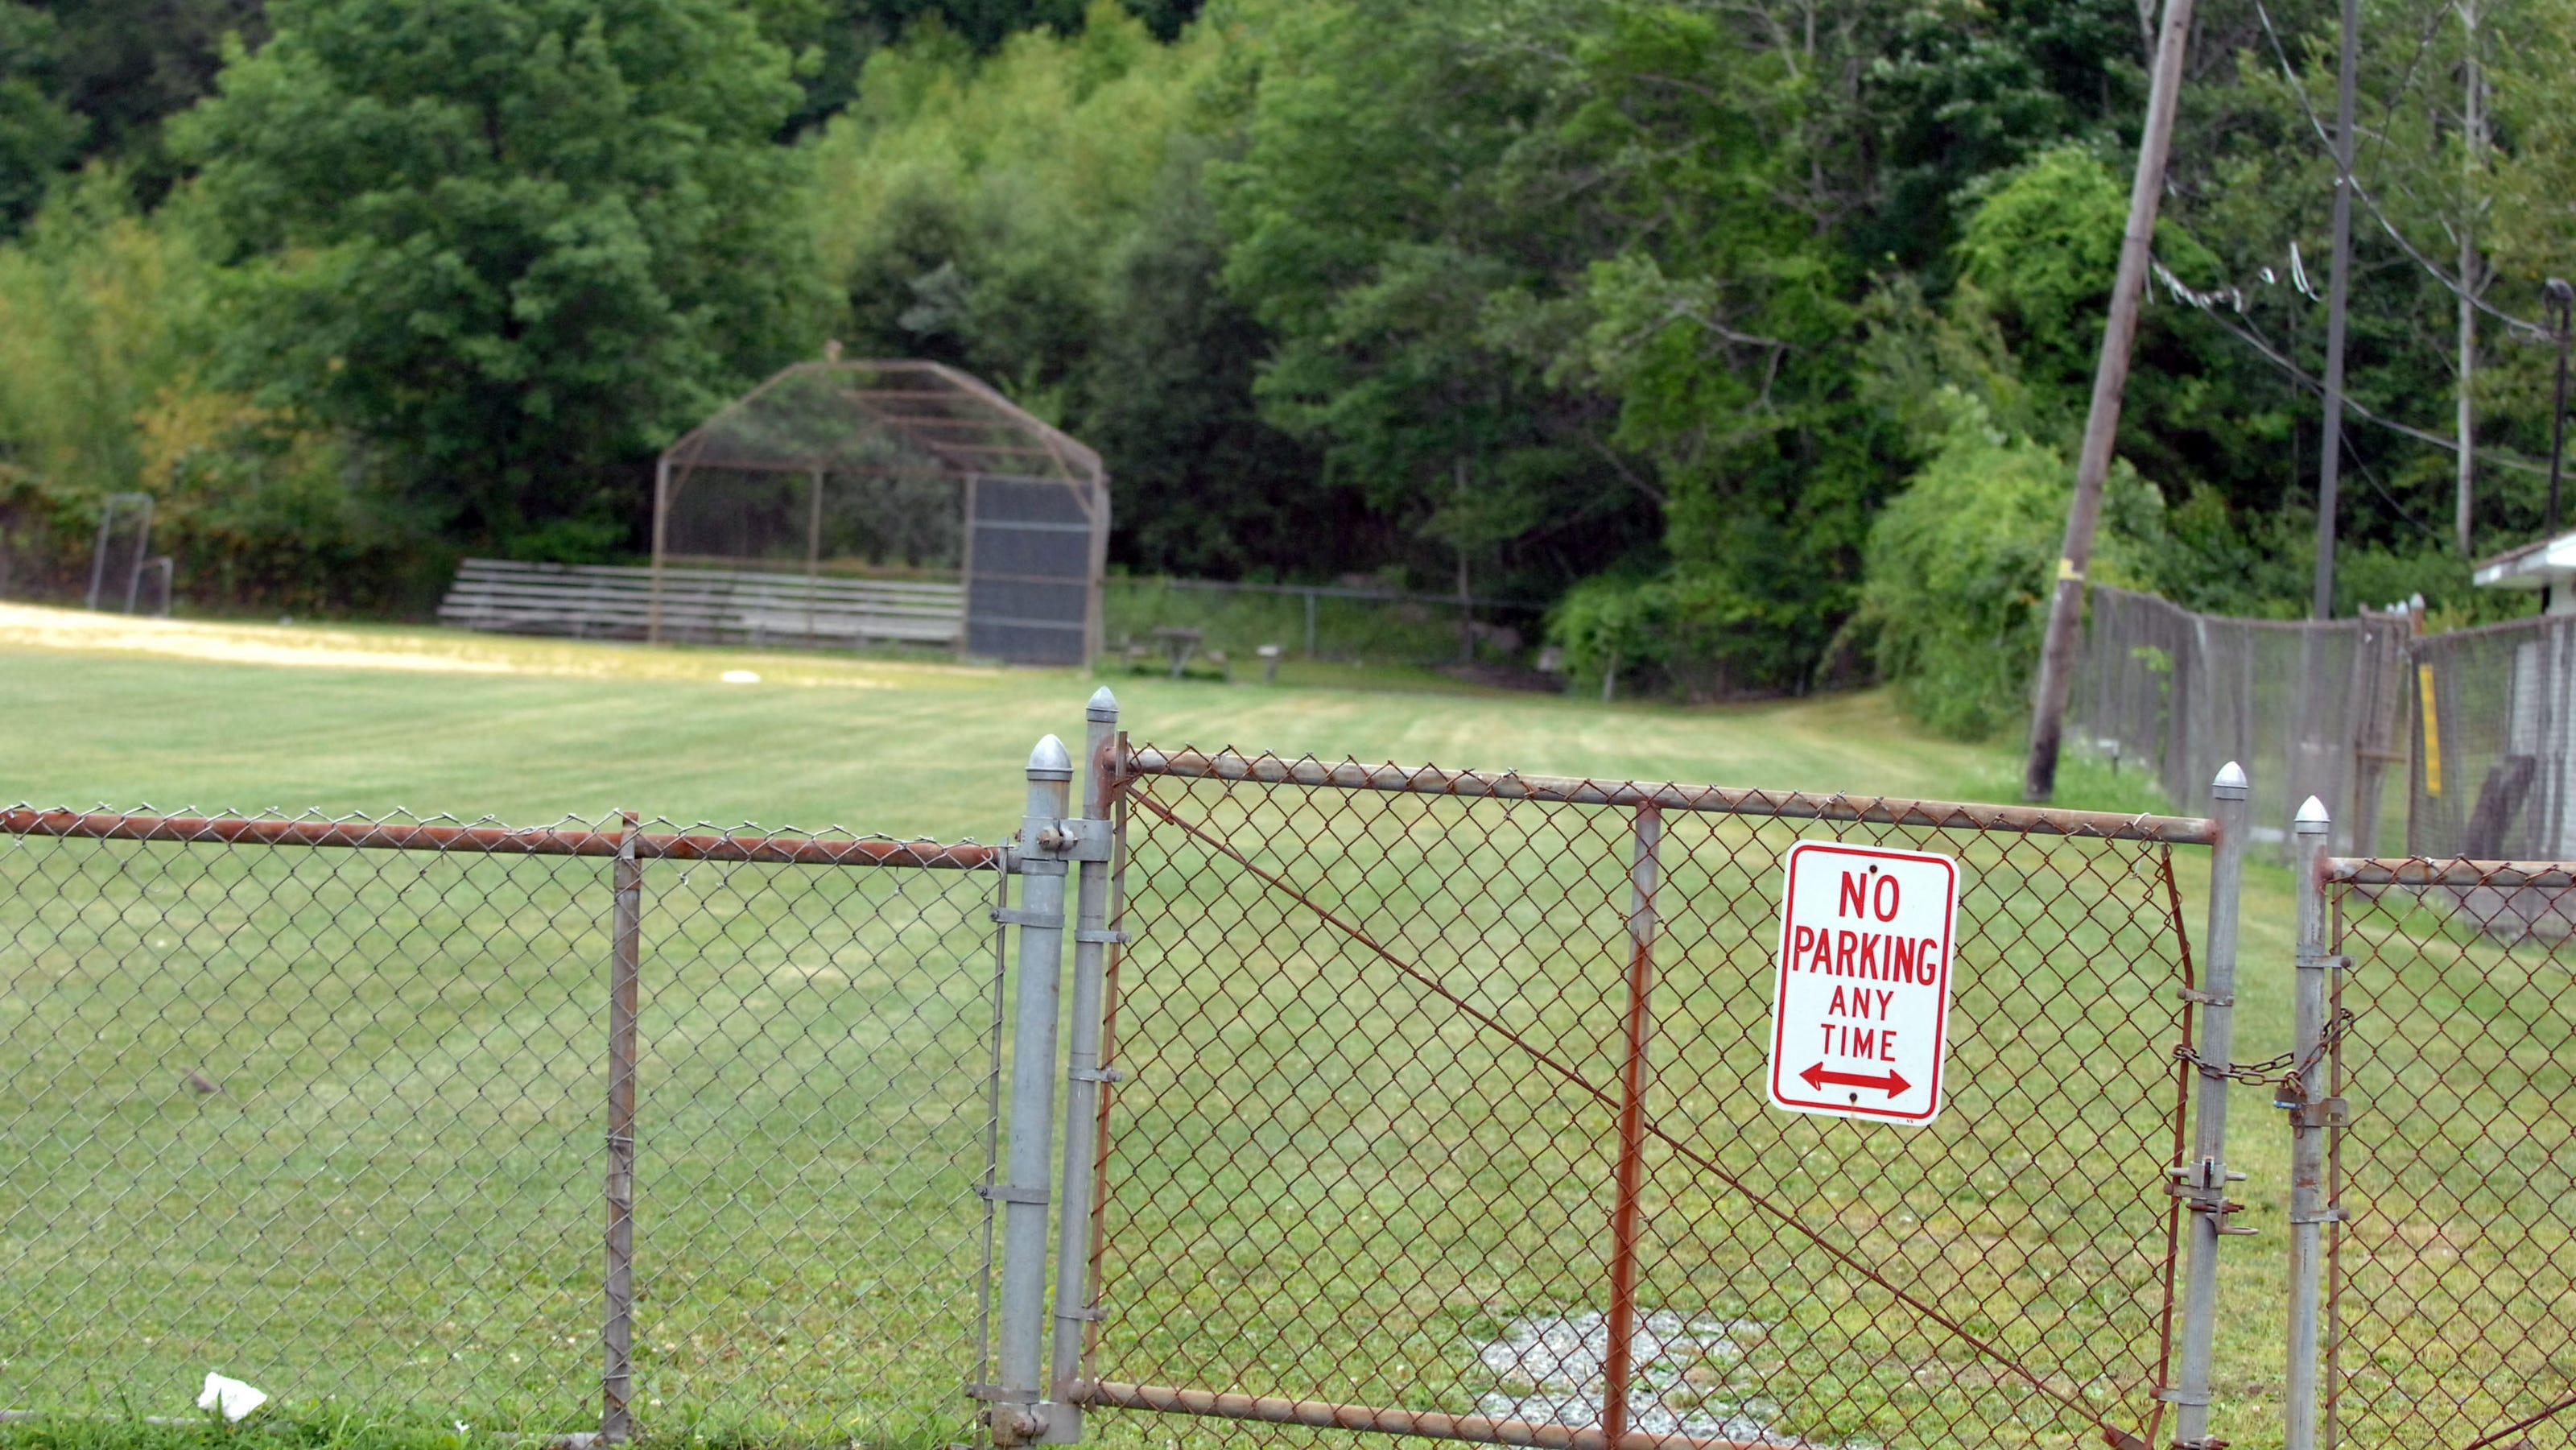 West Milford schools could use COVID shutdown savings on new turf field